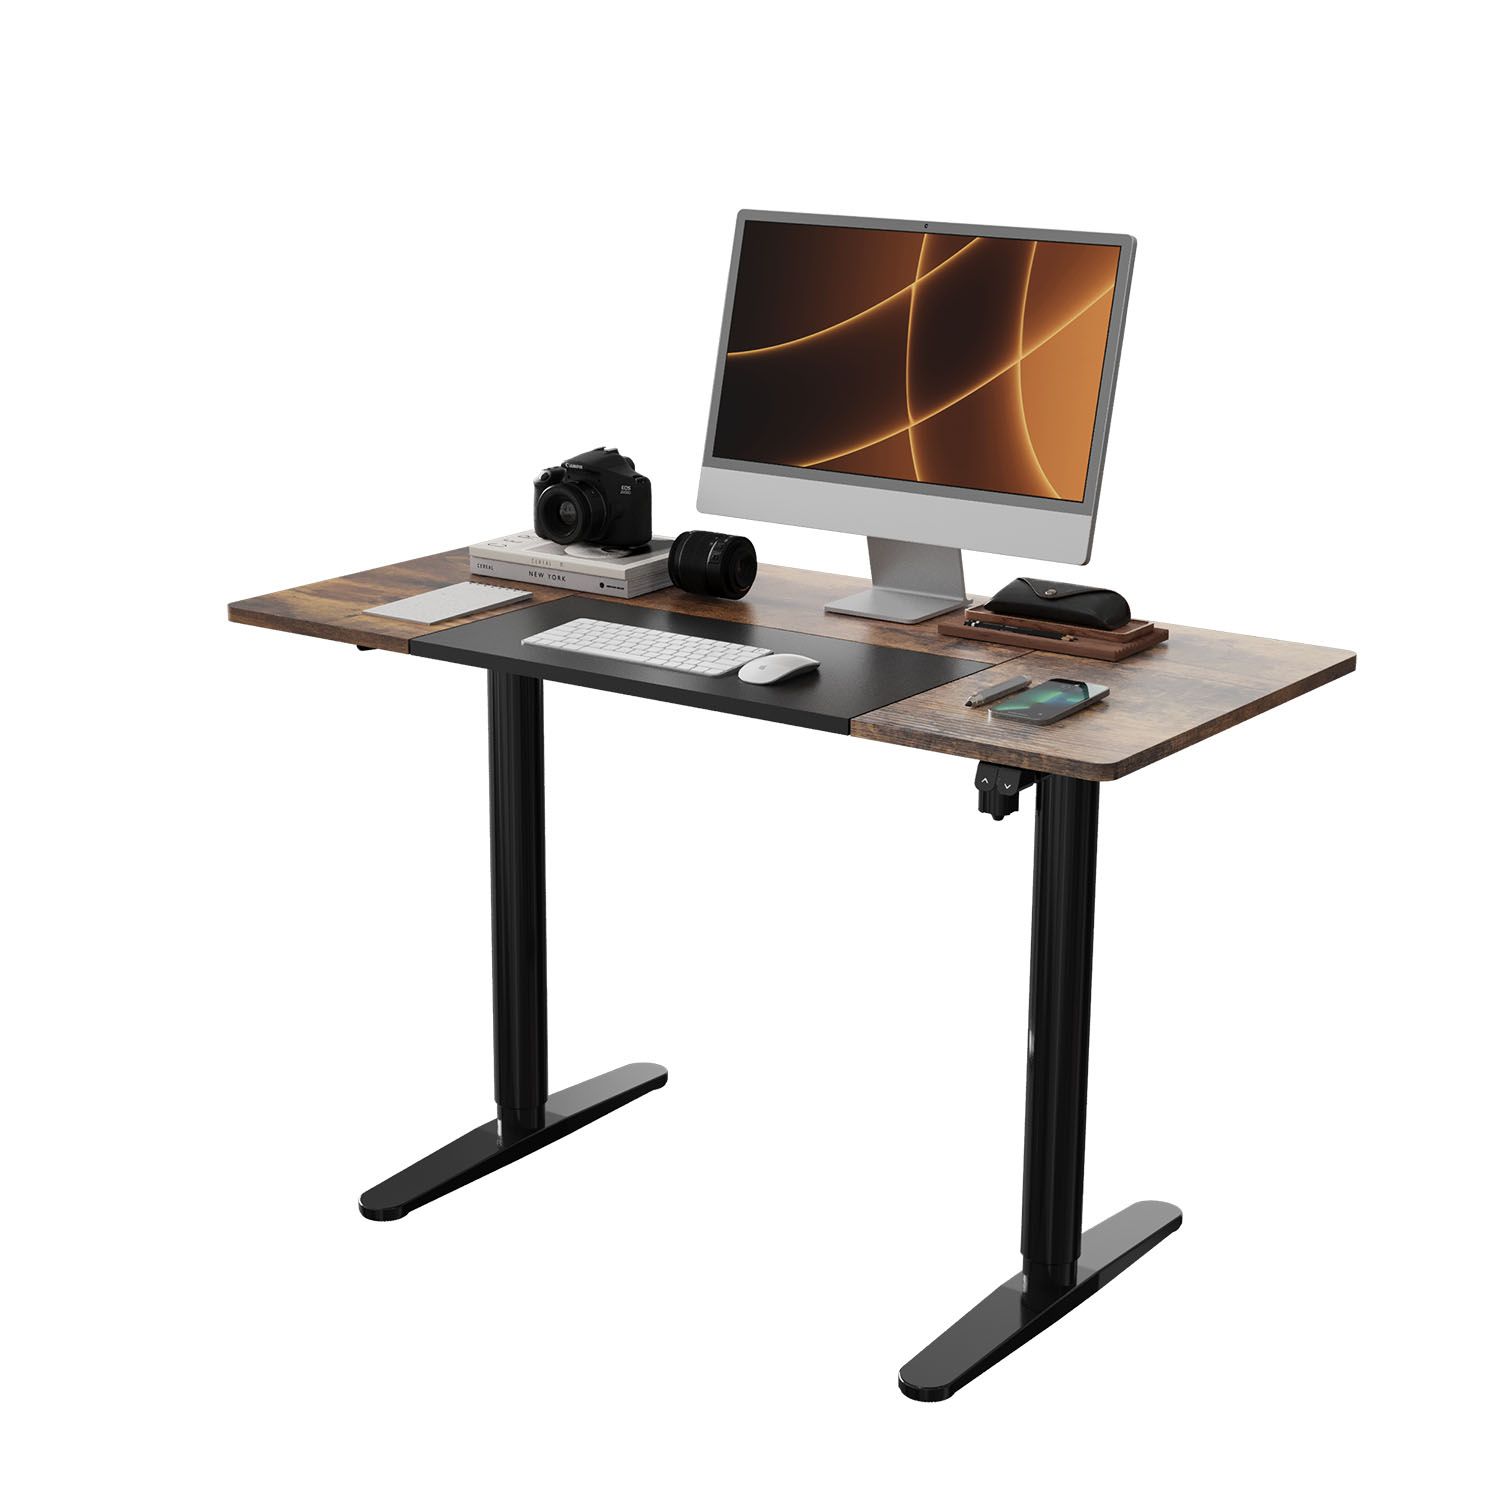 V-mounts ErgoSpot Electric Single Motor Height Adjustable Standing Desks With 4 Spliced Boards And Round Legs VM-JSD5-03-4P